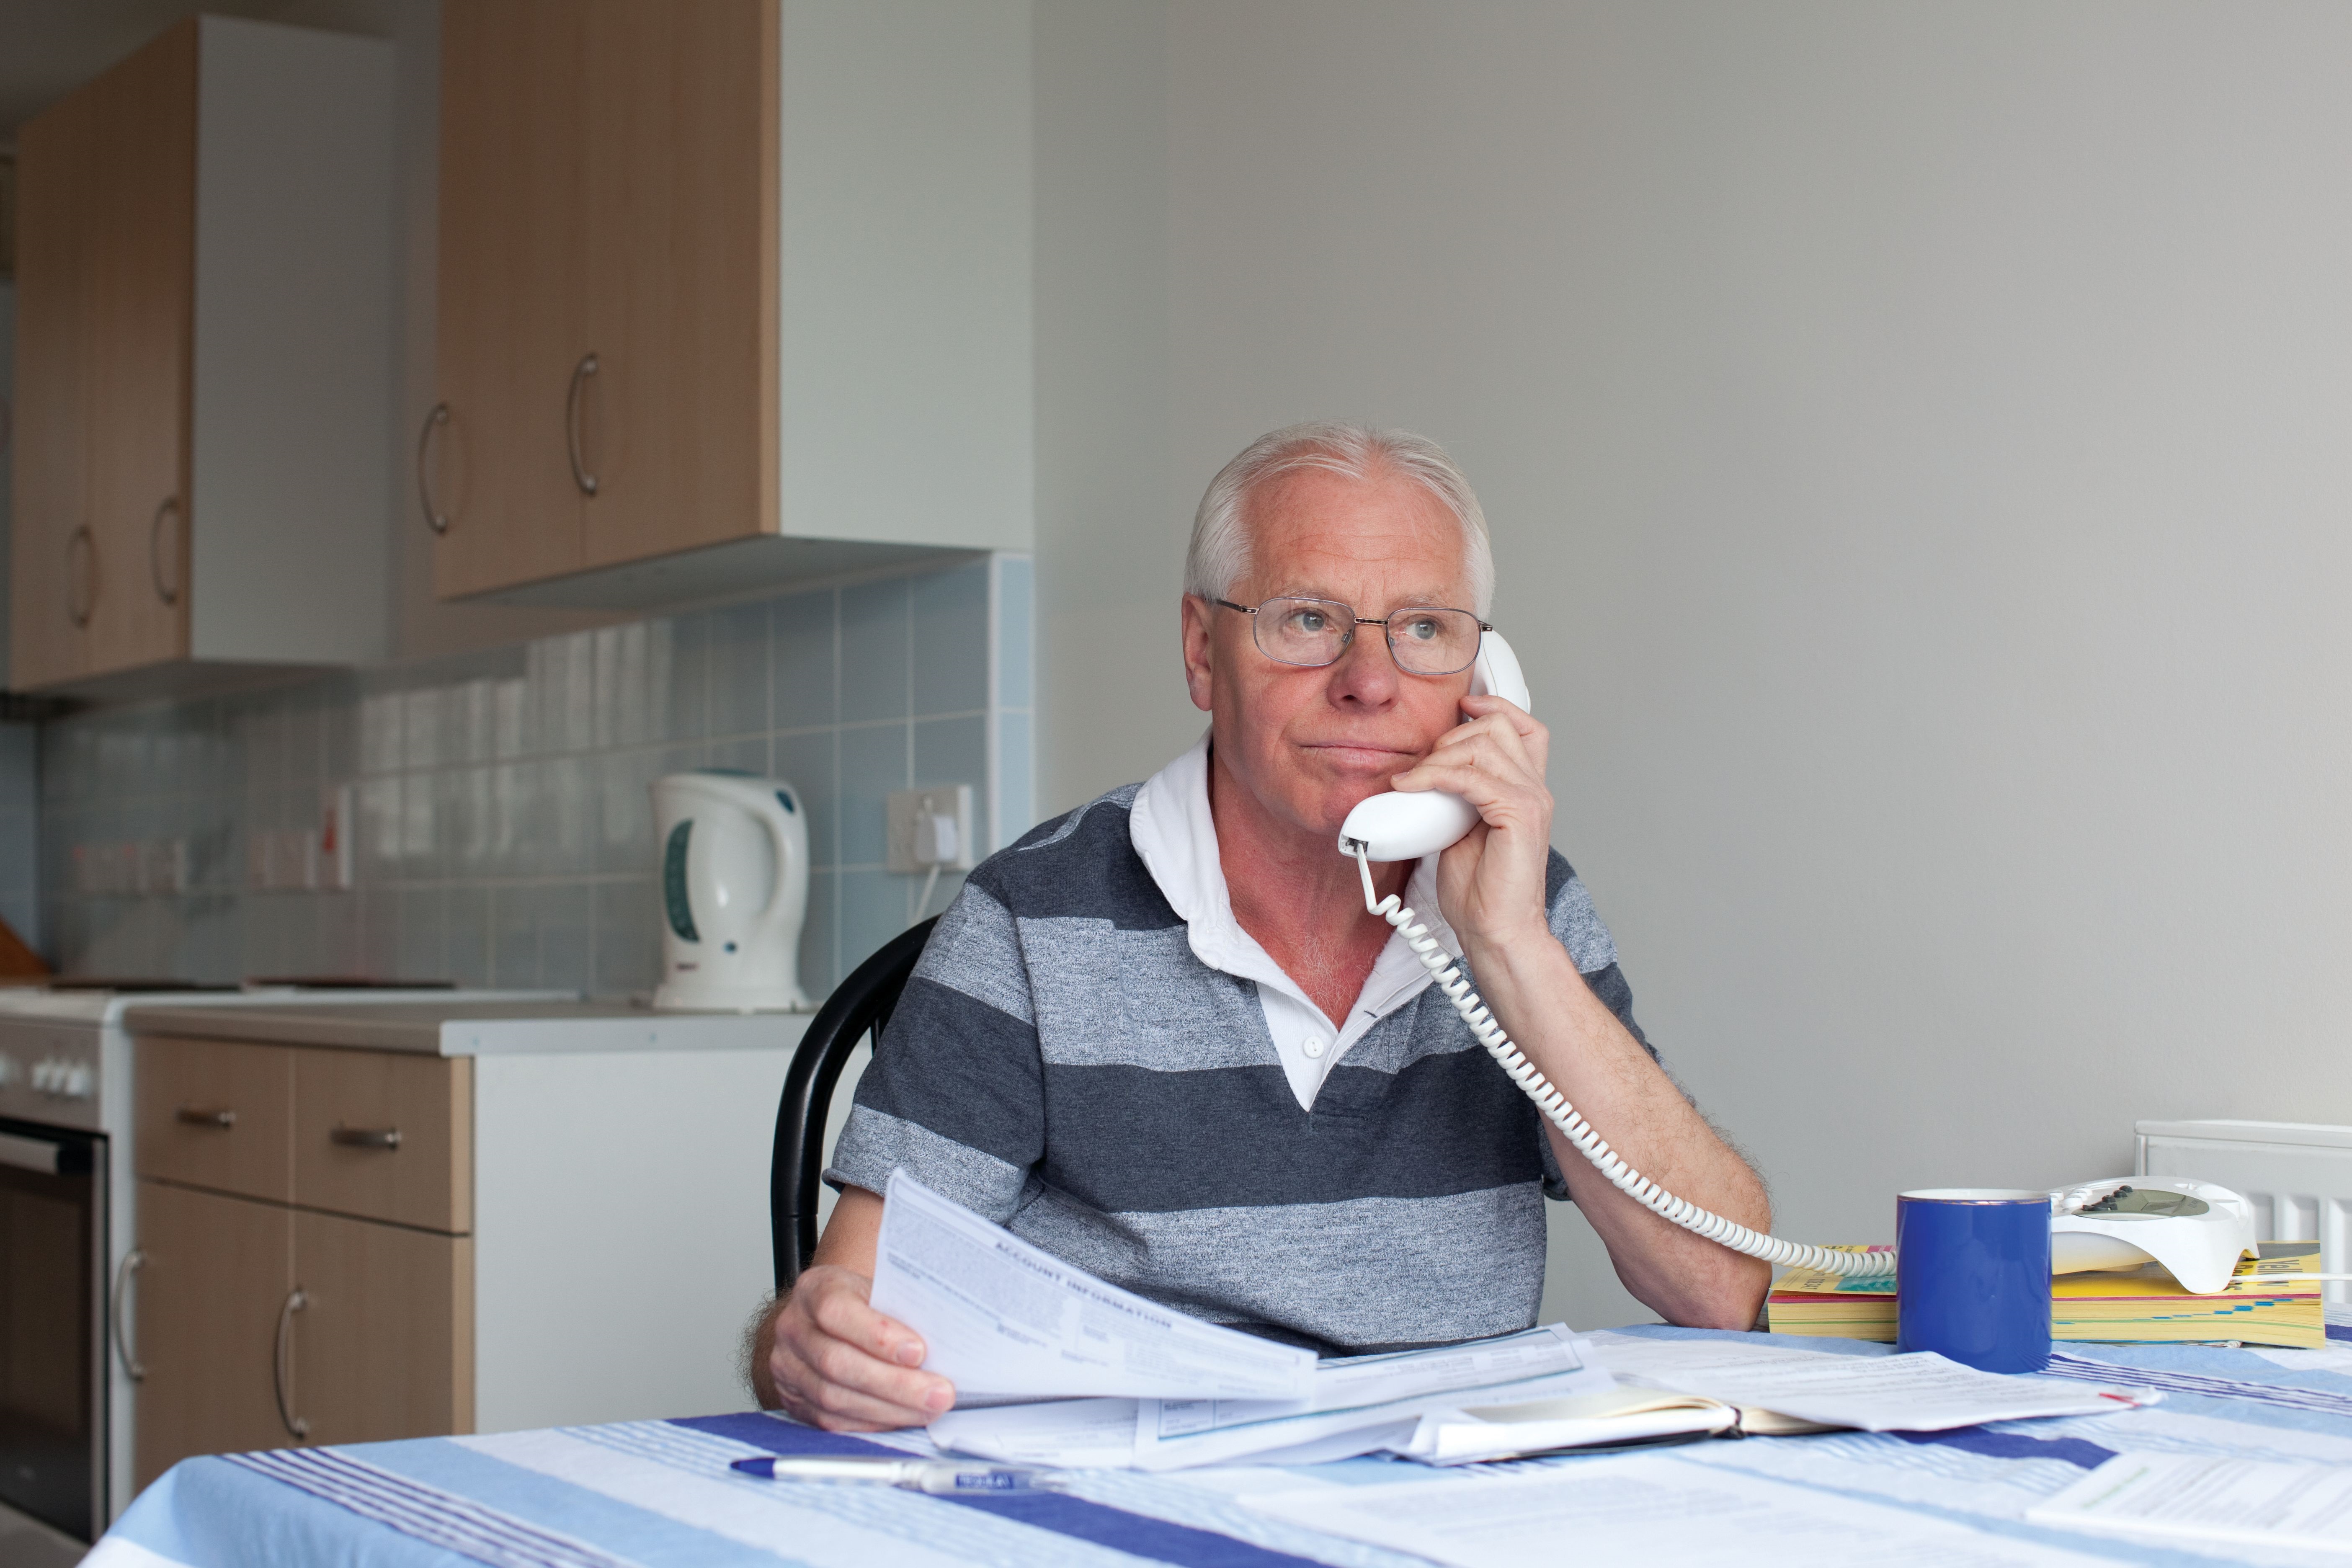 man on phone with paperwork